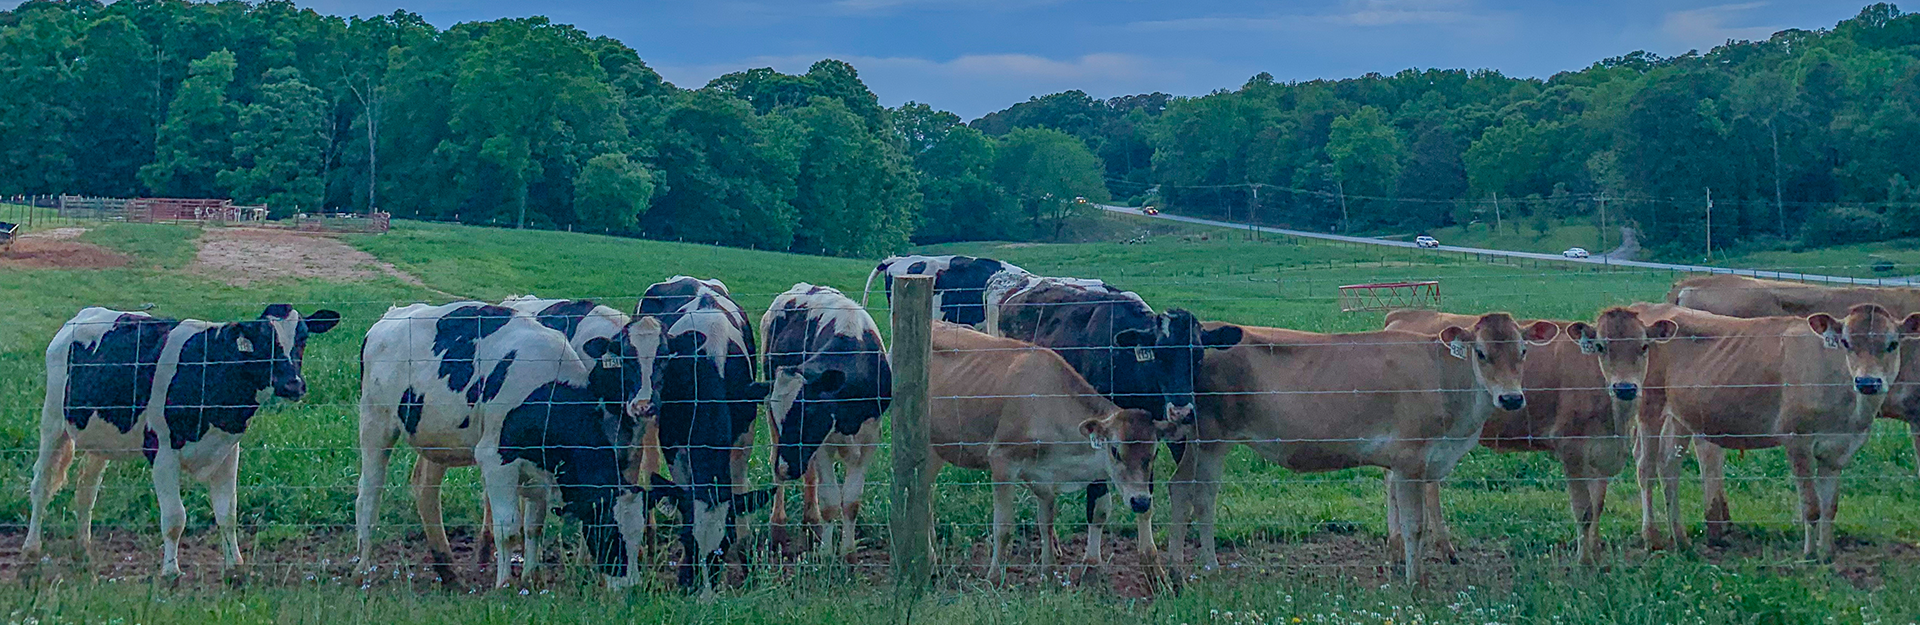 Dairy cows along a fence line